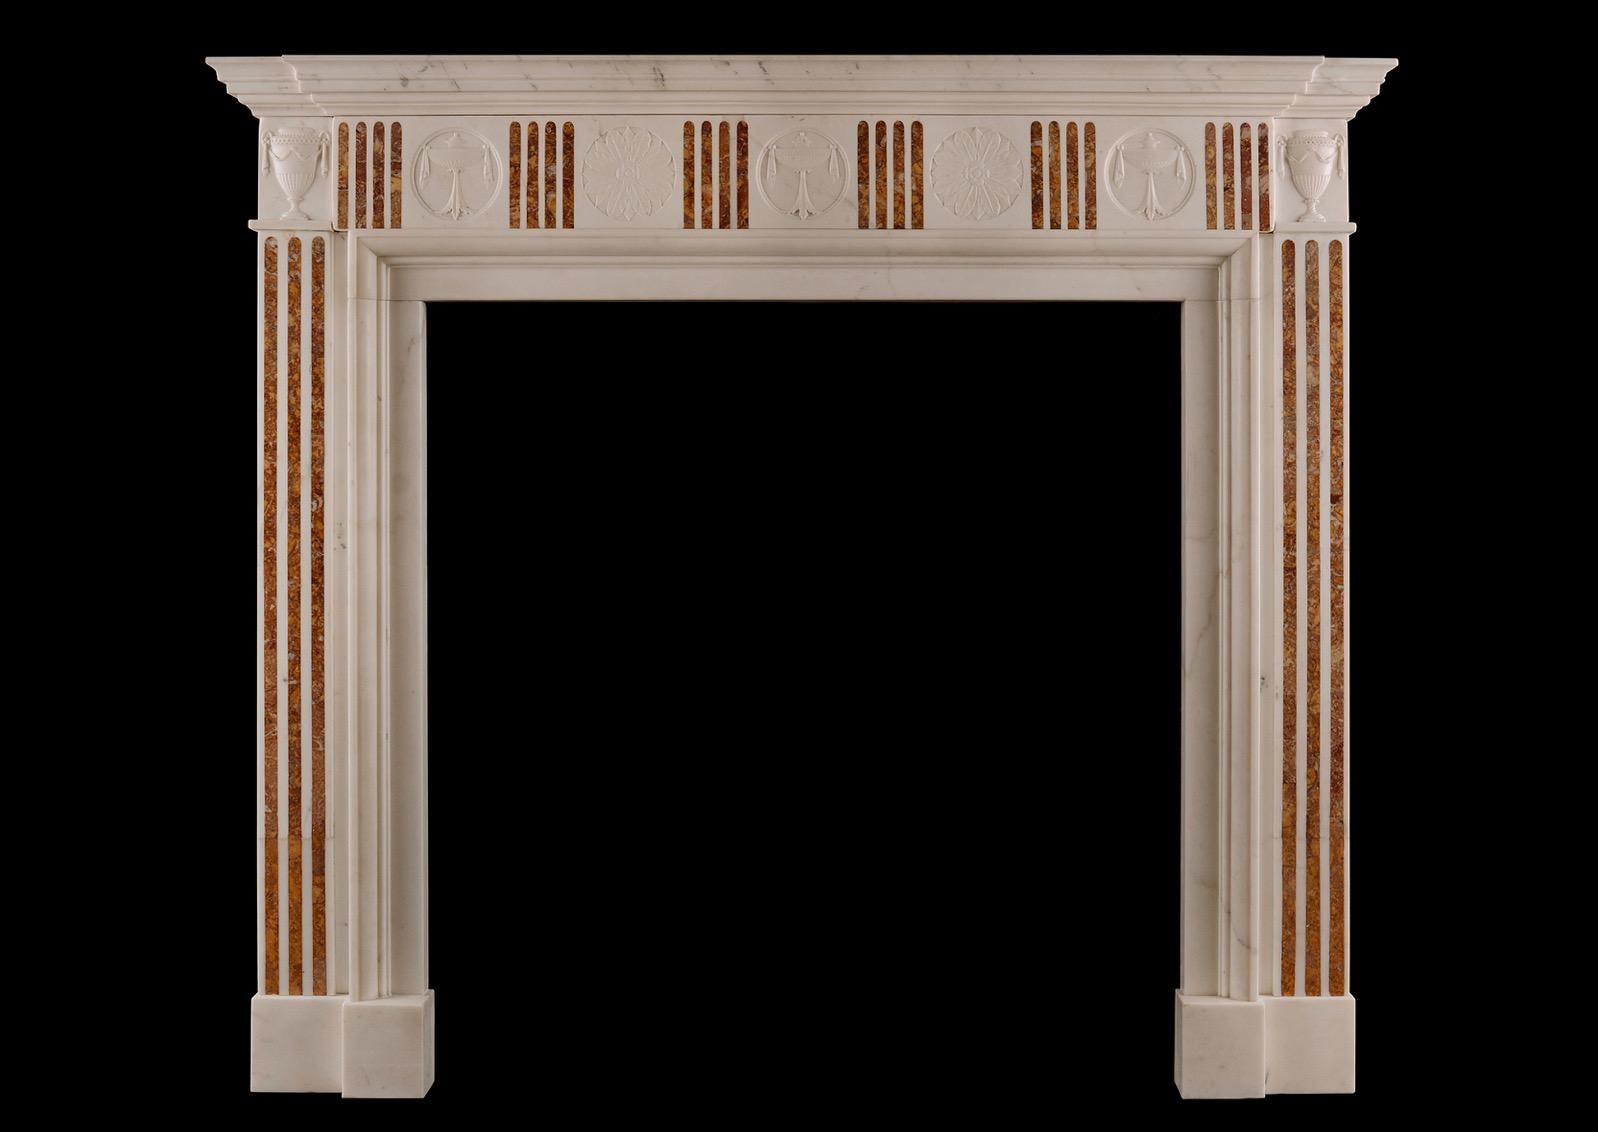 A Regency style fireplace in Statuary marble antique fireplace with Sienna Brocatelle inlay. The fluted jambs surmounted by urns of classical form. The frieze with matching flutes, interspersed with rosettes with carved urns and foliage. English,